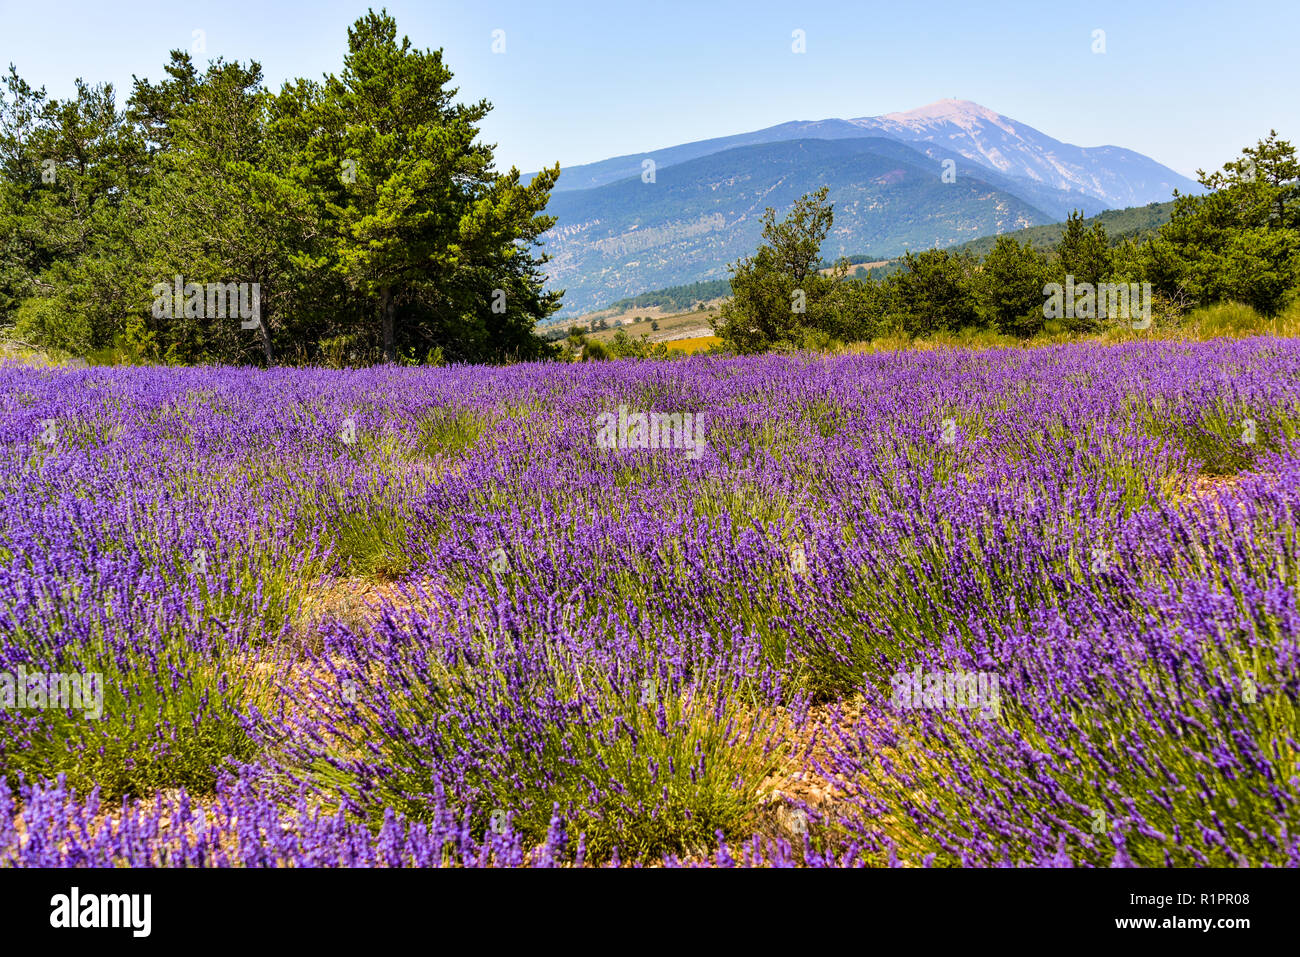 mountain Mont Ventoux with lavender field in foreground, village Ferrassières, Provence, France Stock Photo